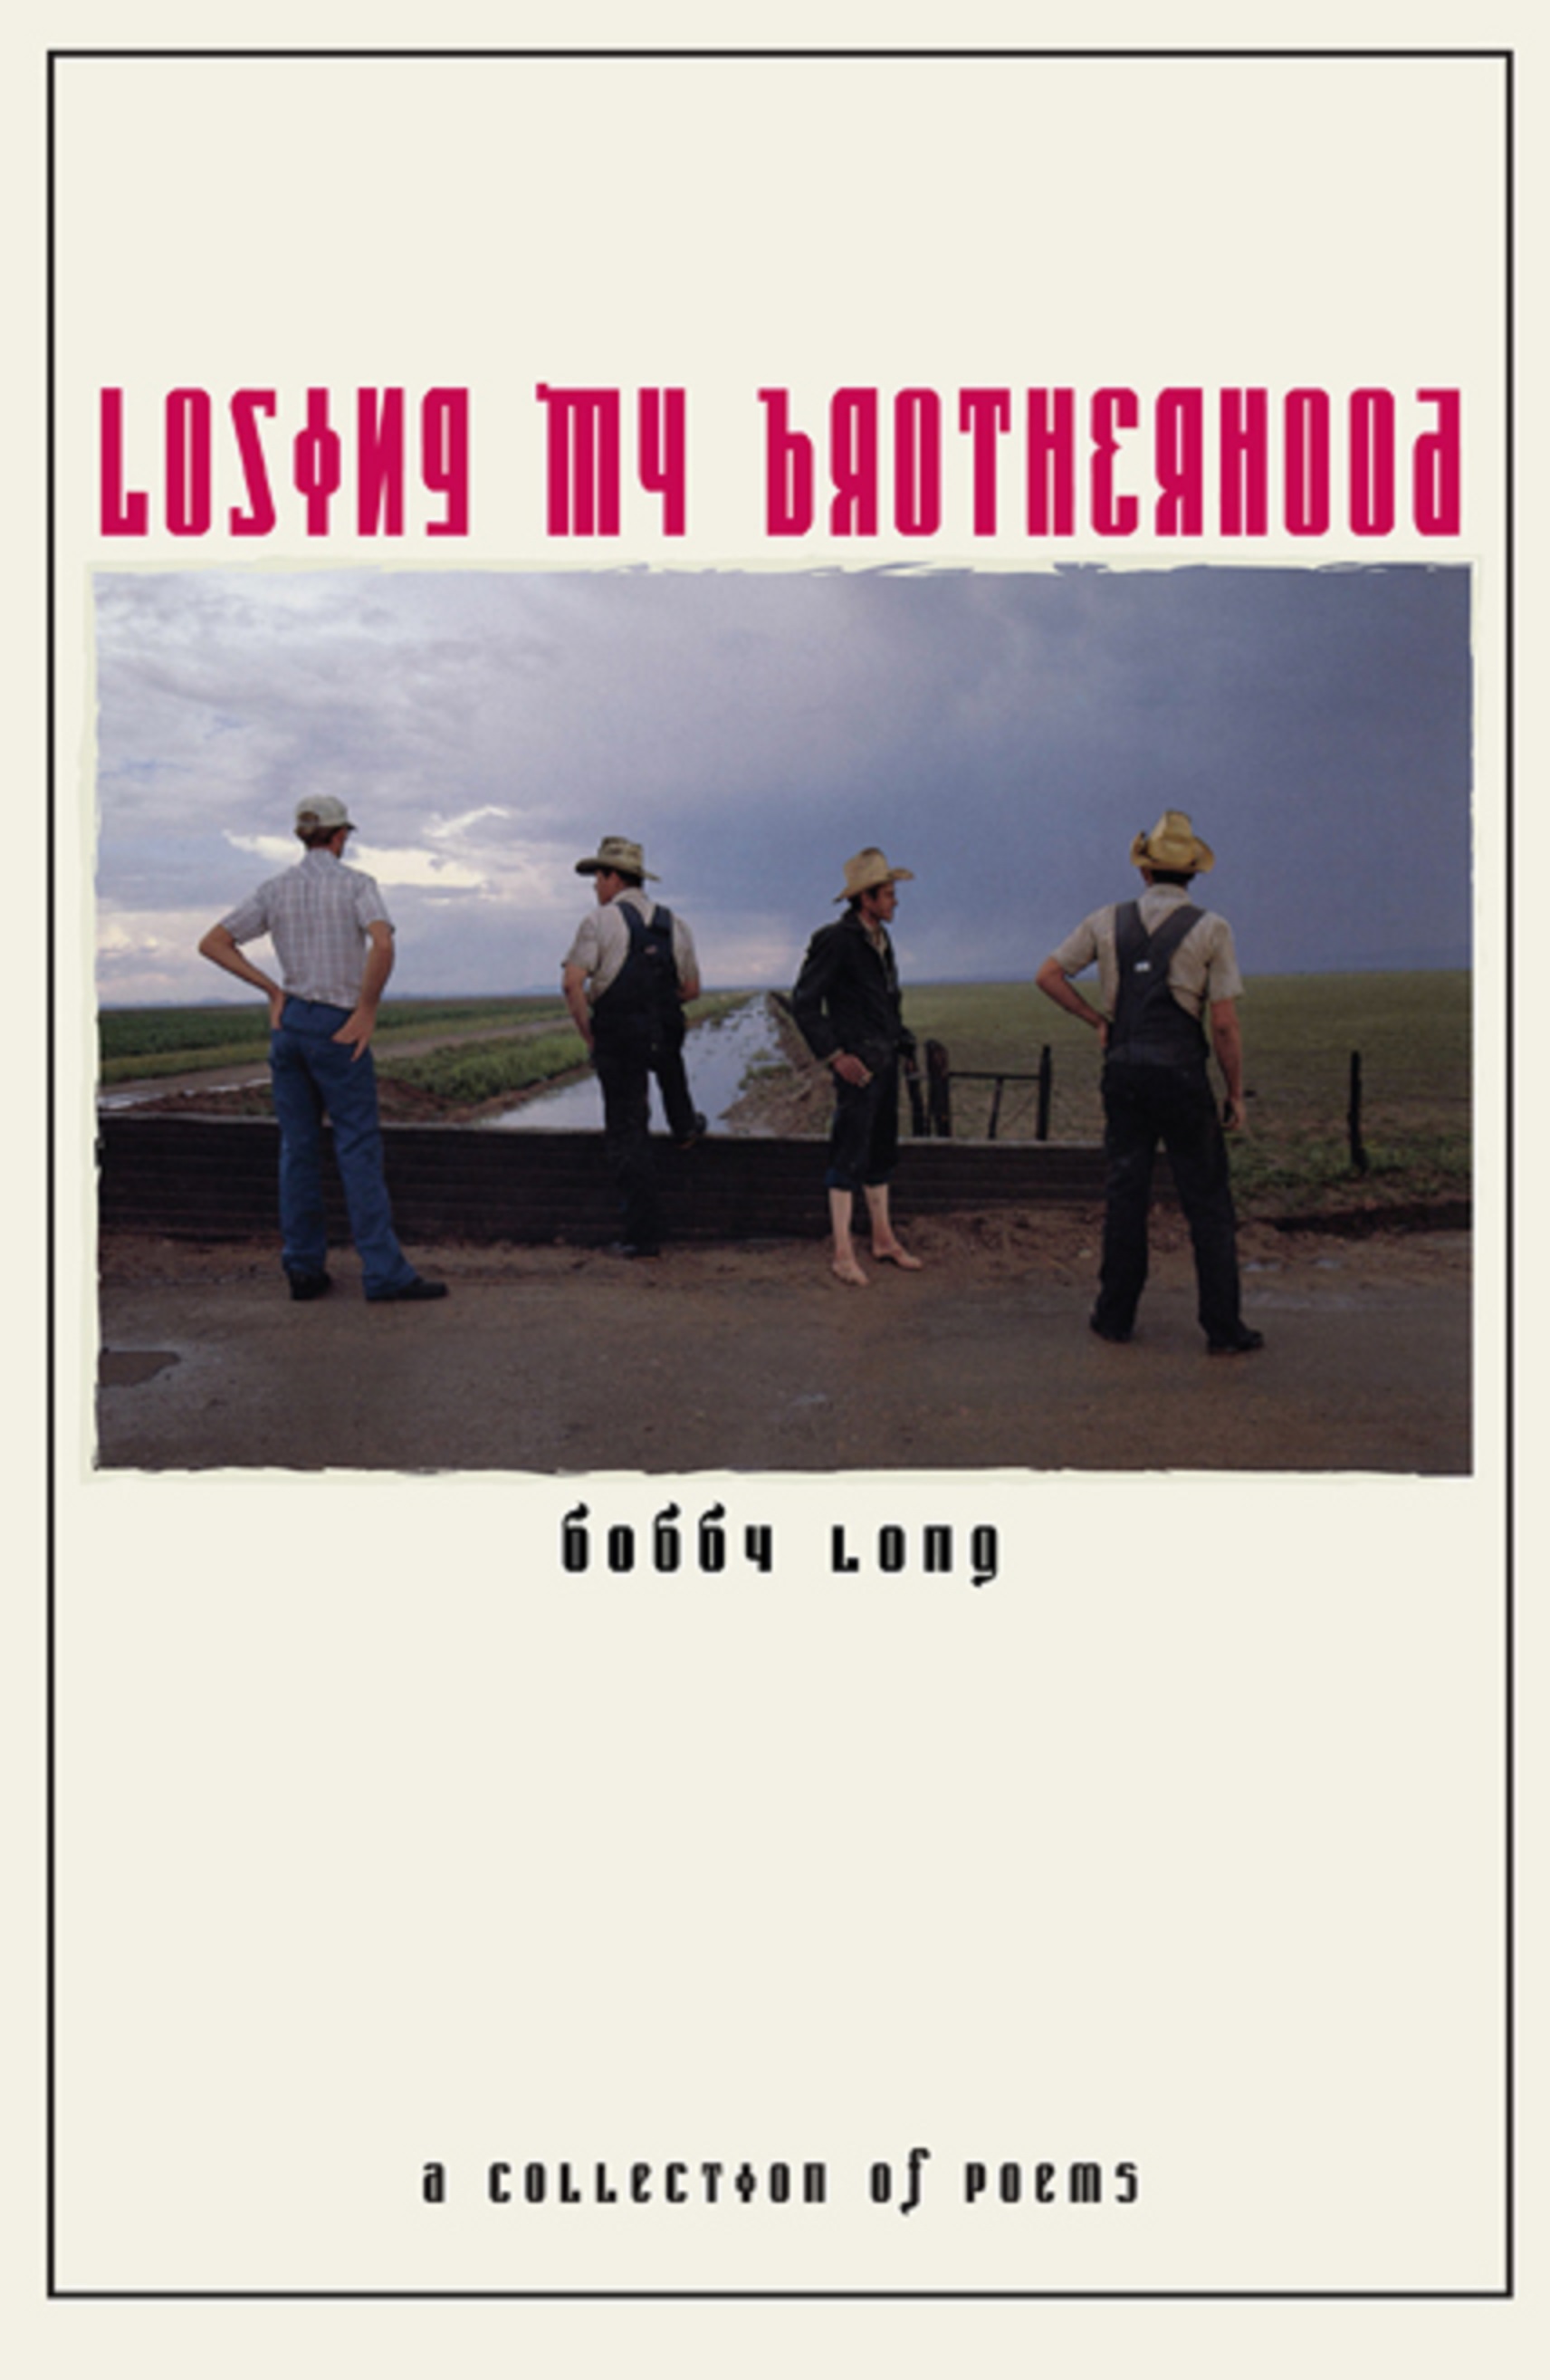 Bobby Long's Losing my Brotherhood: Dissipating Youth & Gaining Perspective